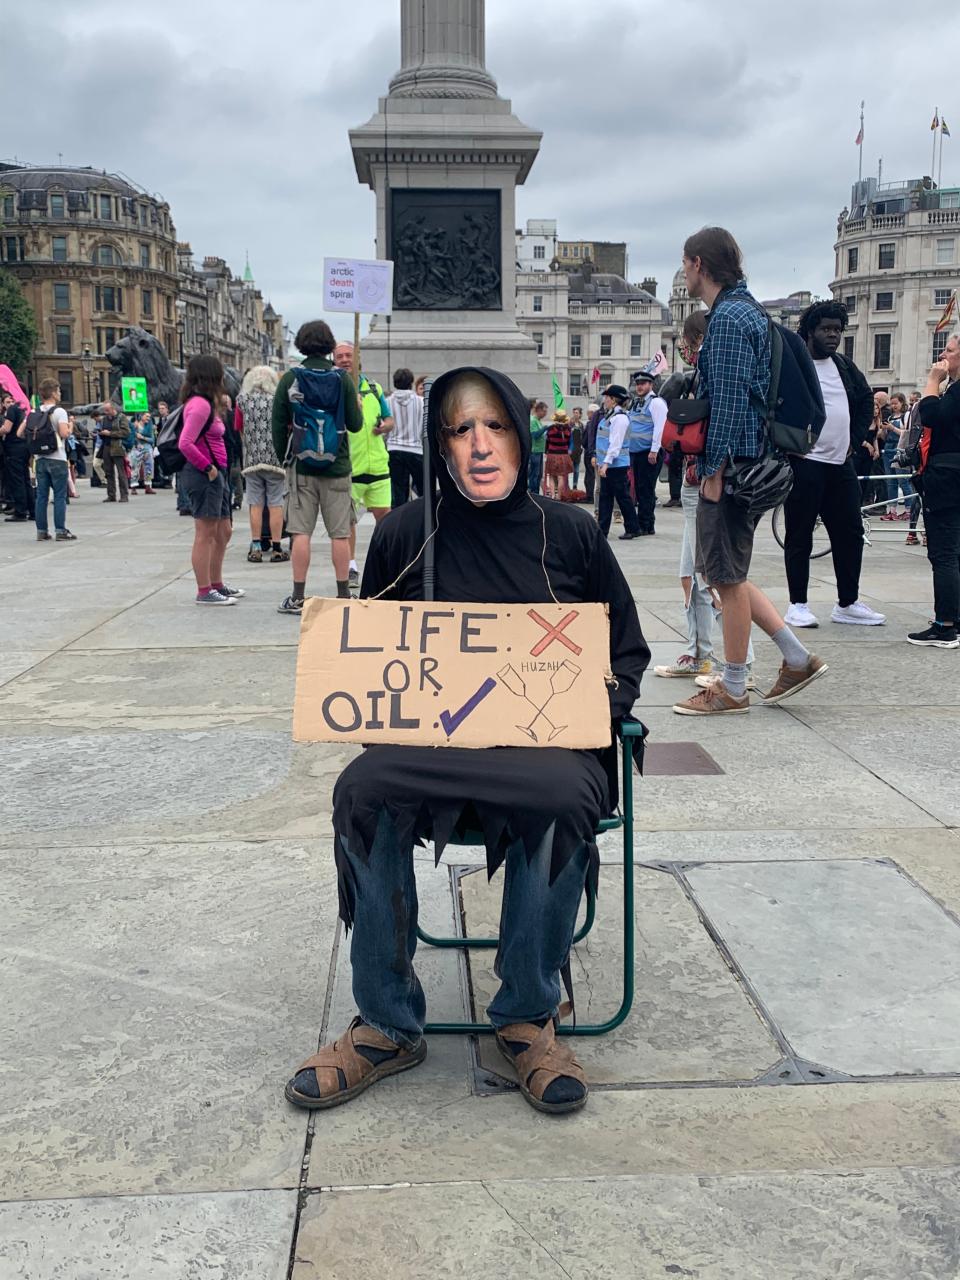 A man wearing a Boris Johnson face mask holds an anti-fossil fuel placard in Trafalgar Square (Sam Hancock/The Independent)